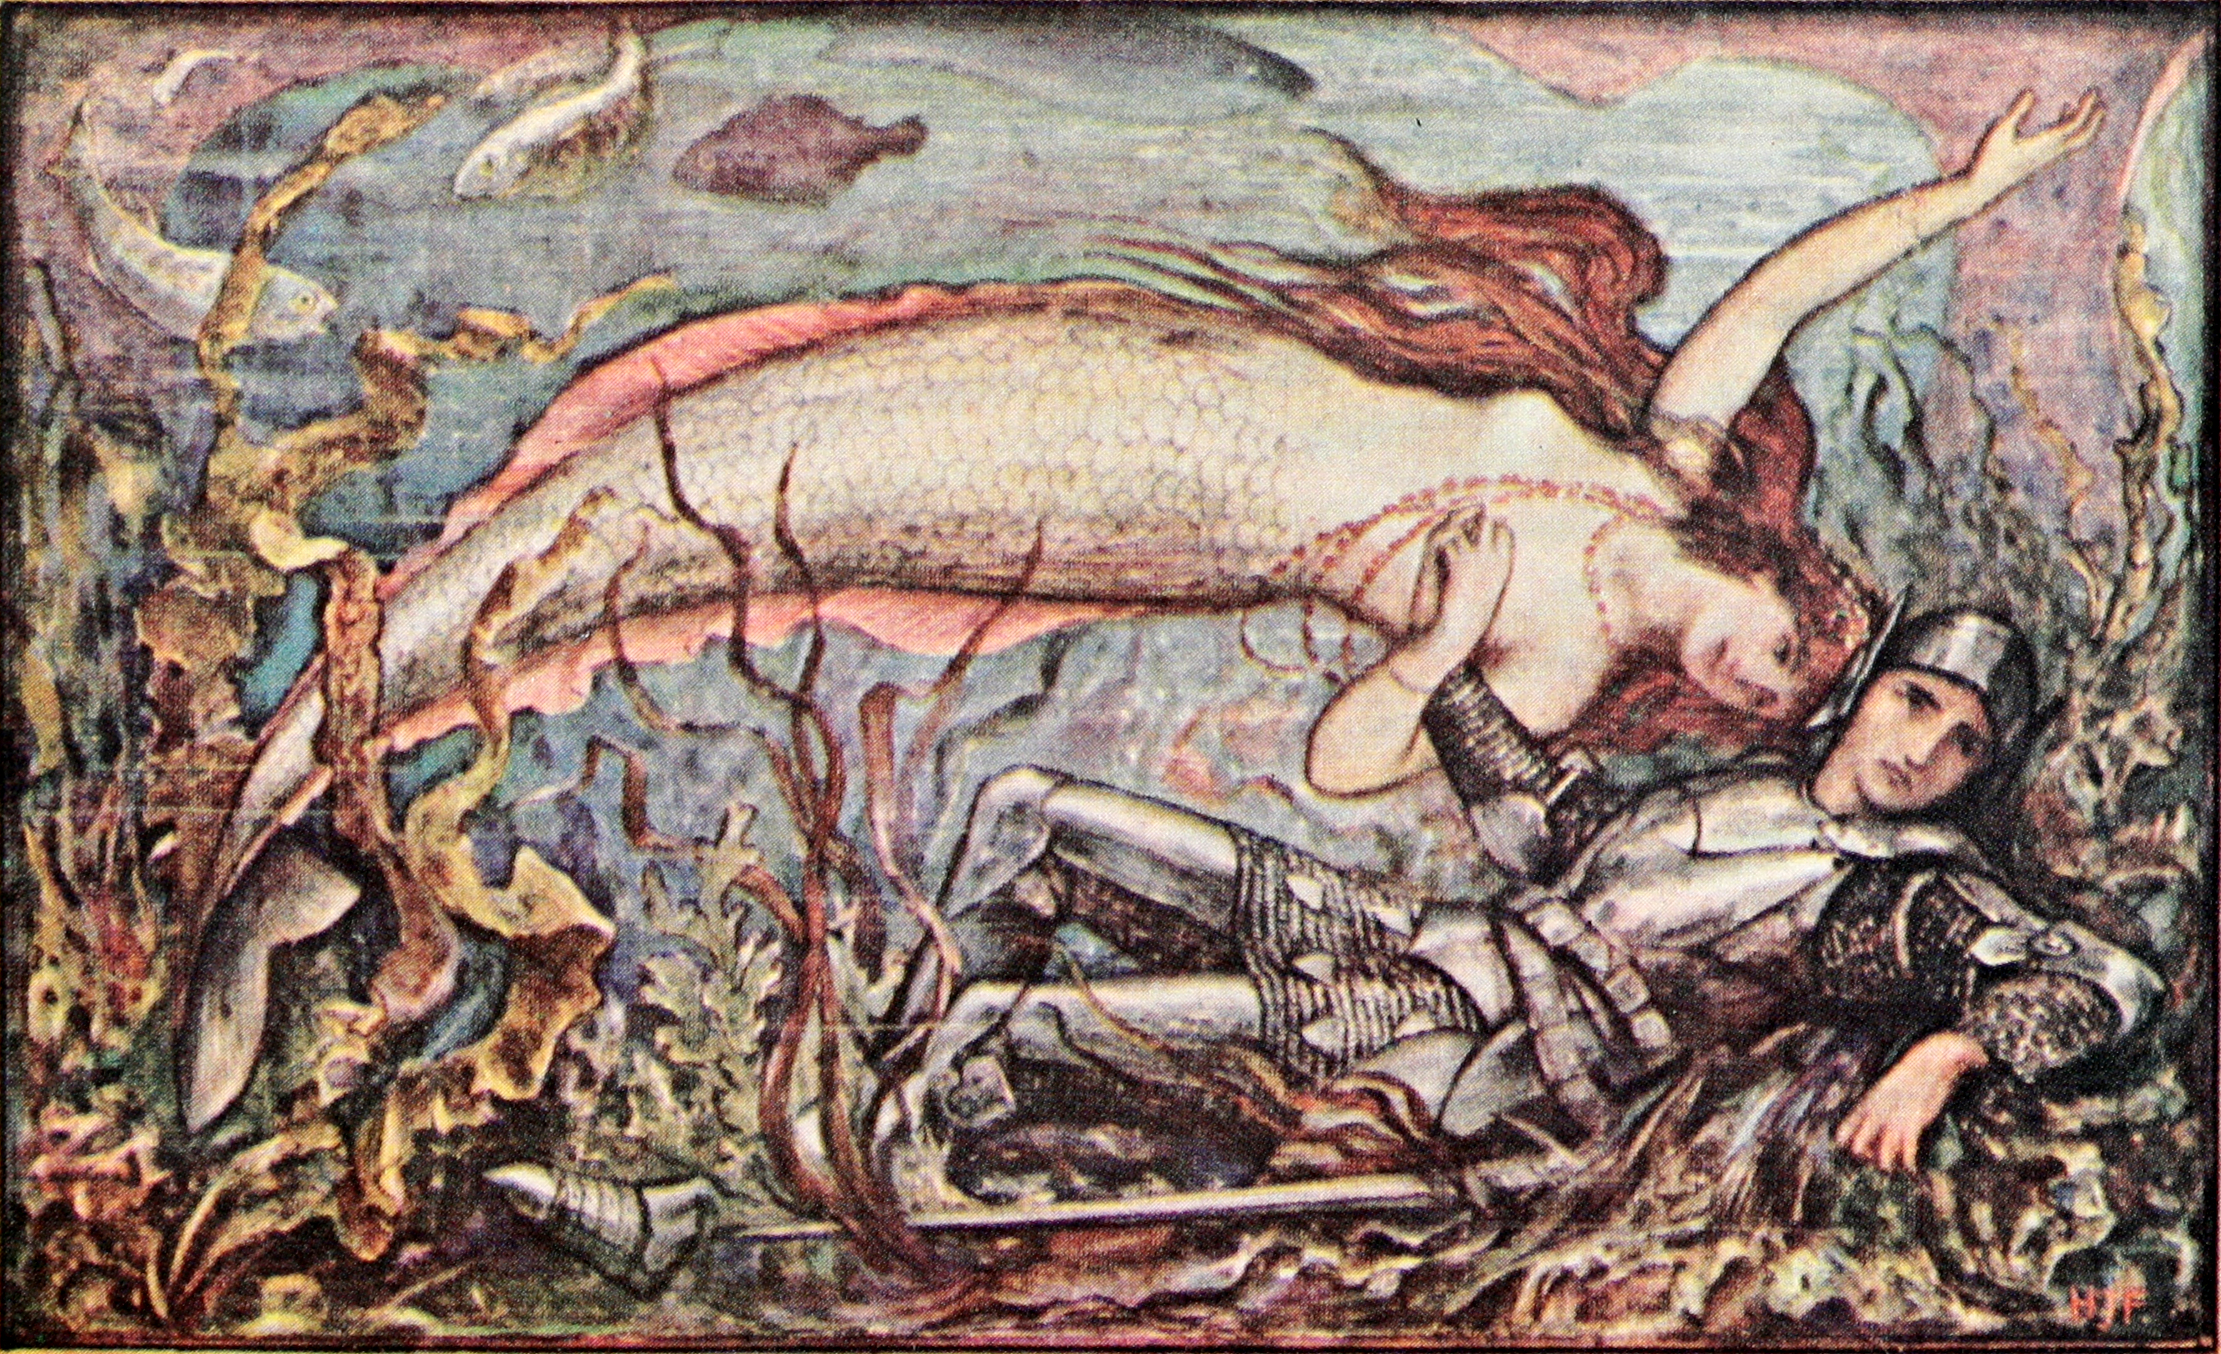 A mermaid swooning over an armoured knight laying on a seabed of aquatic plants